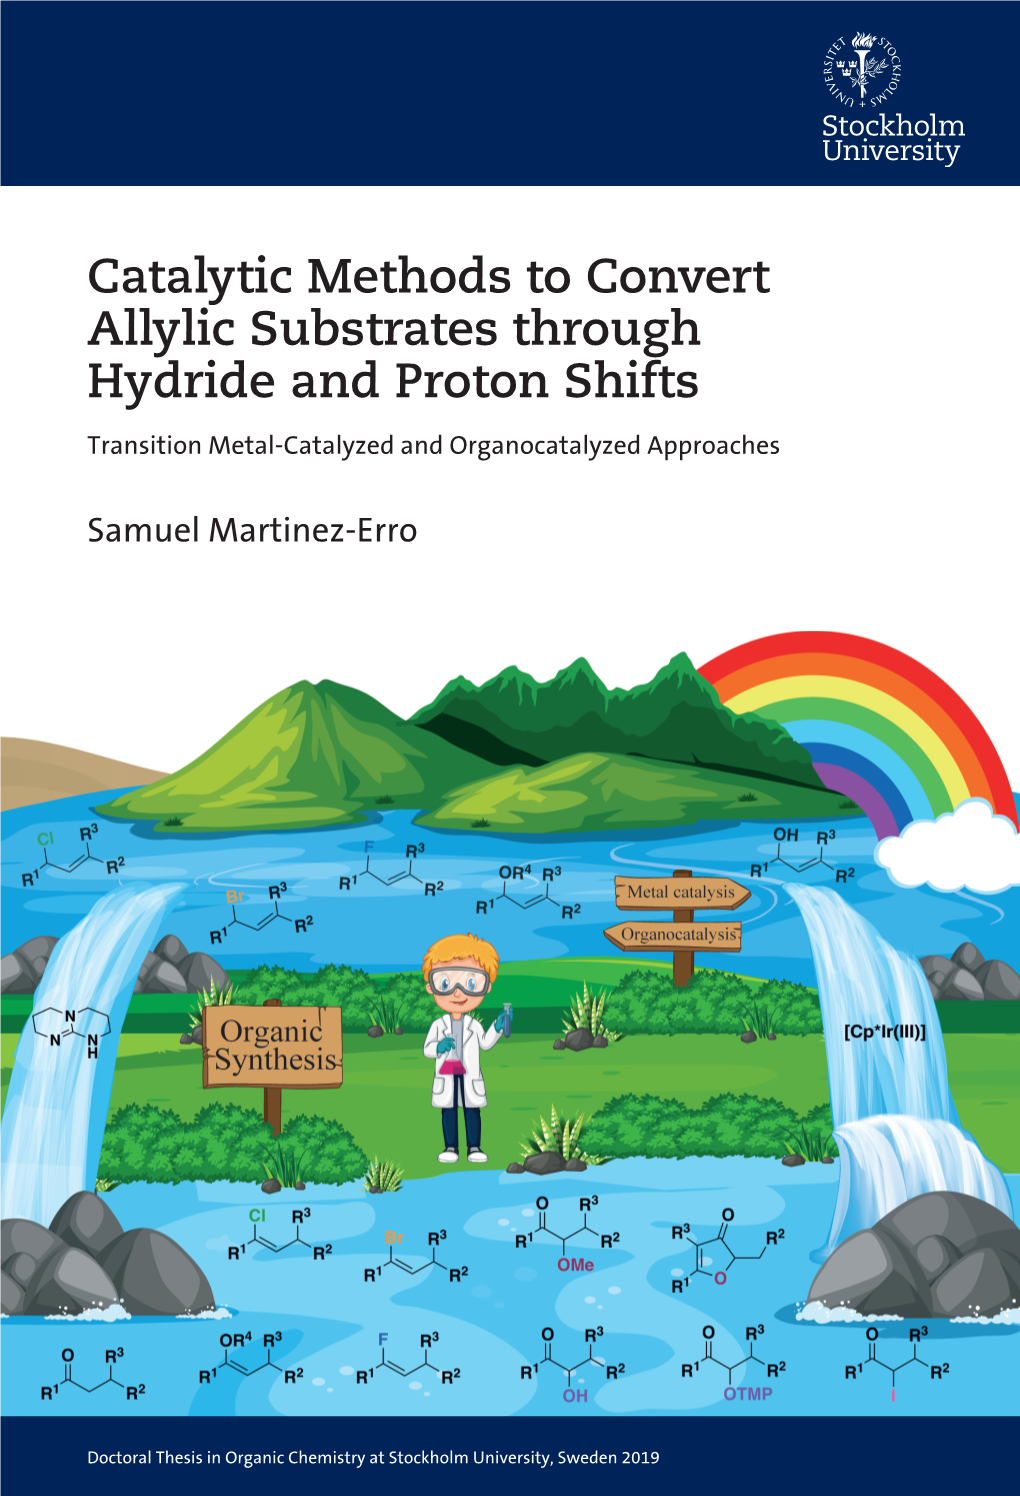 Catalytic Methods to Convert Allylic Substrates Through Hydride and Proton Shifts